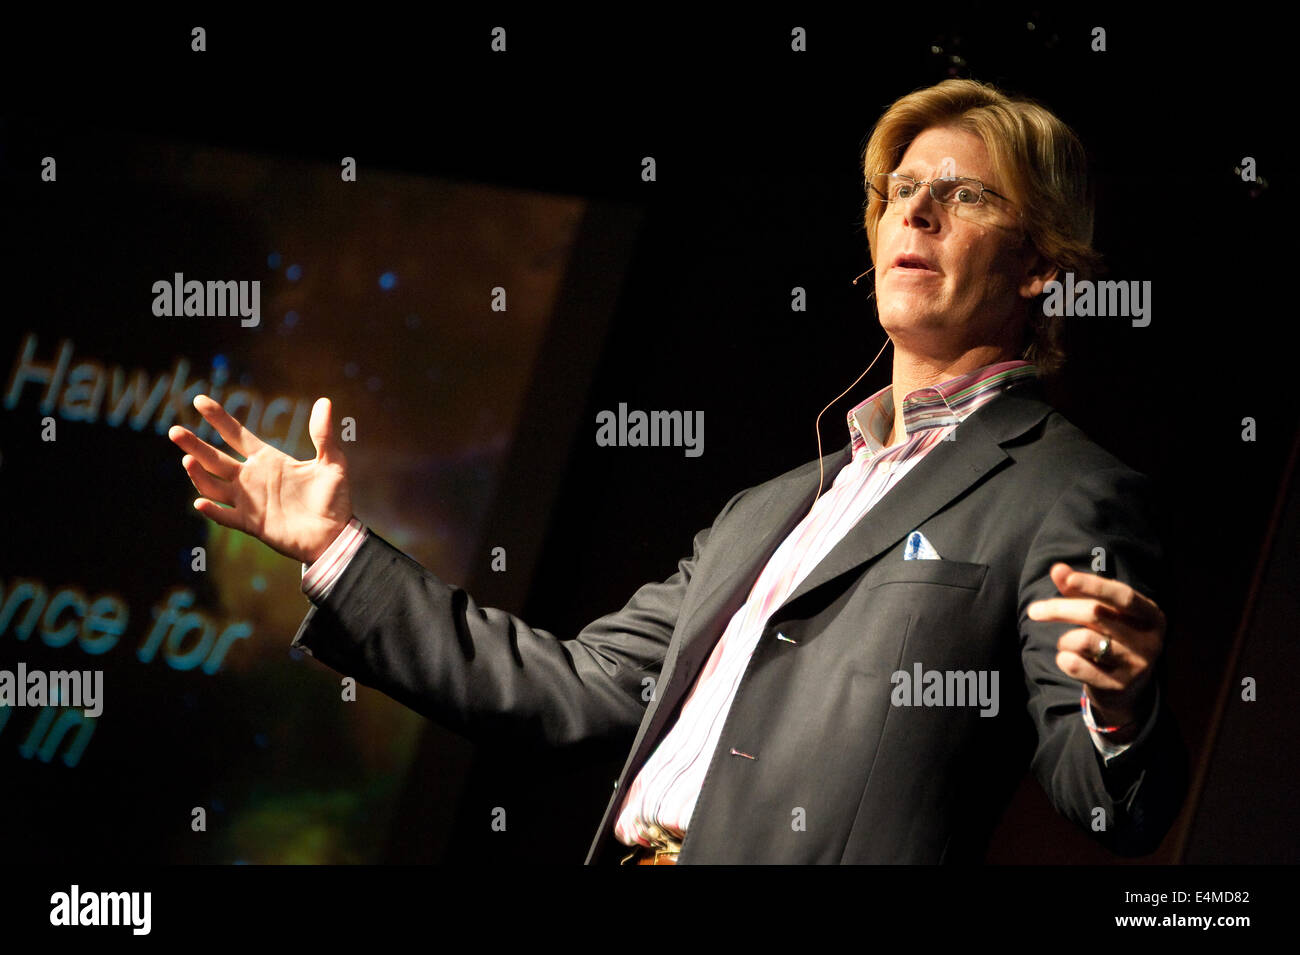 Jay Richards, a Senior Fellow of the Discovery Institute, speaking on Intelligent Design, Cosmology and Philosophy of Science. Stock Photo